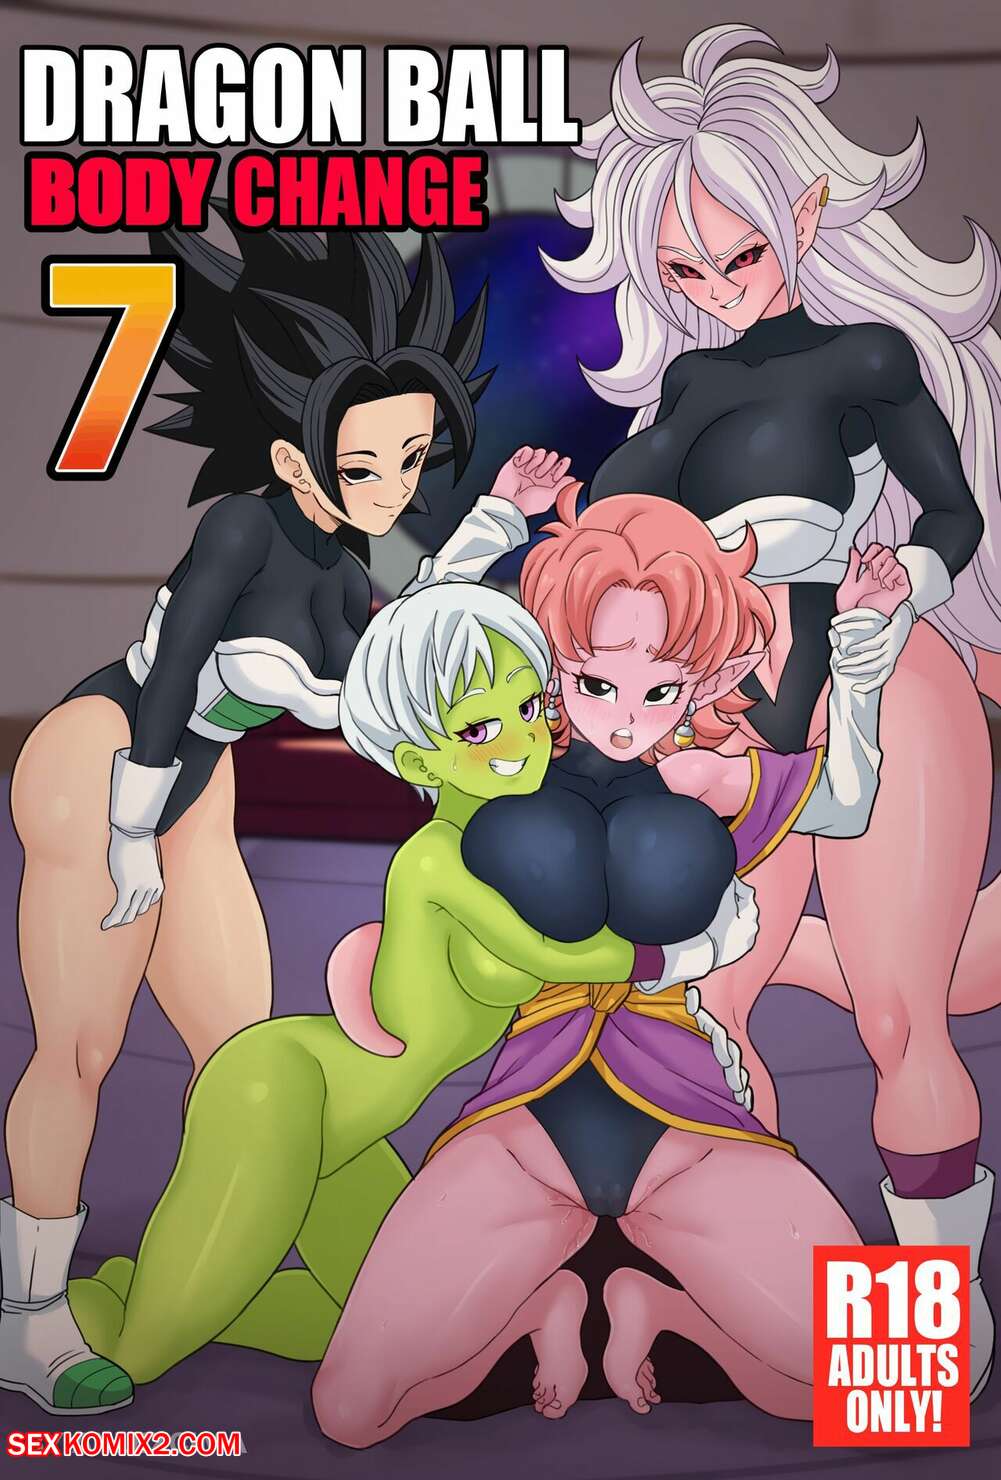 annabelle joaquin recommends dragon ball lesbian porn pic